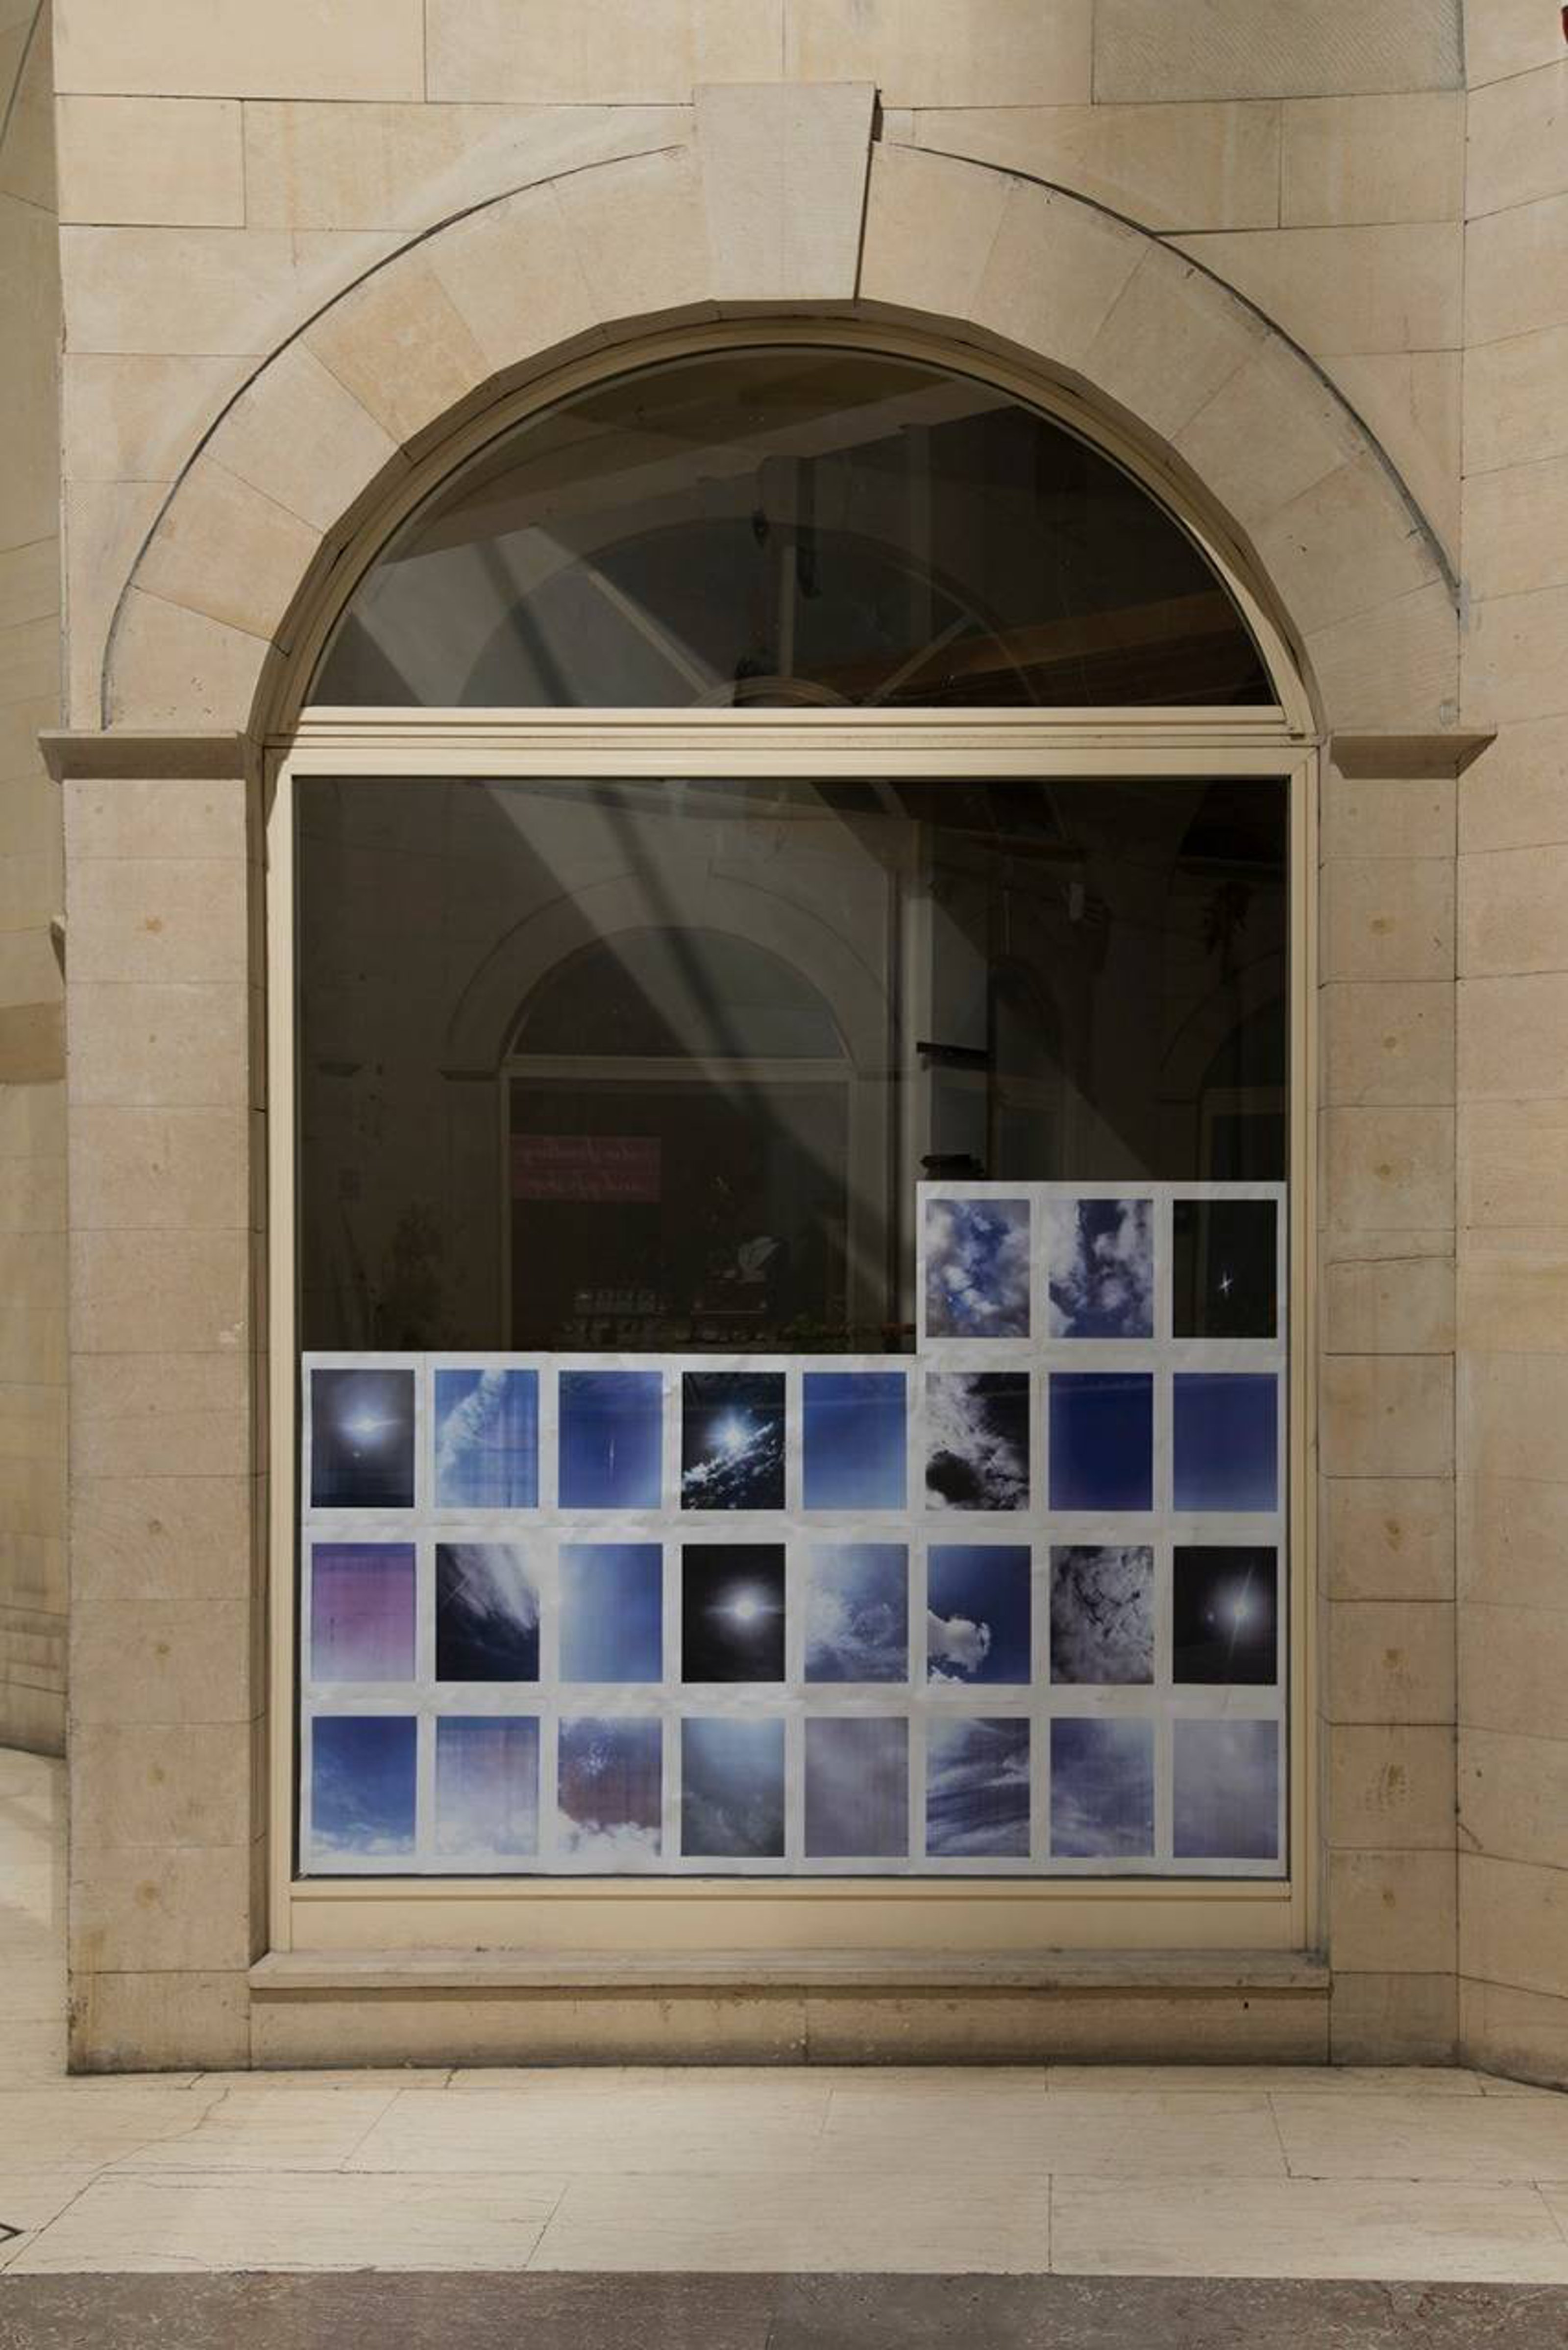 27 pieces of photographs are hung on the large window seen from the outside.